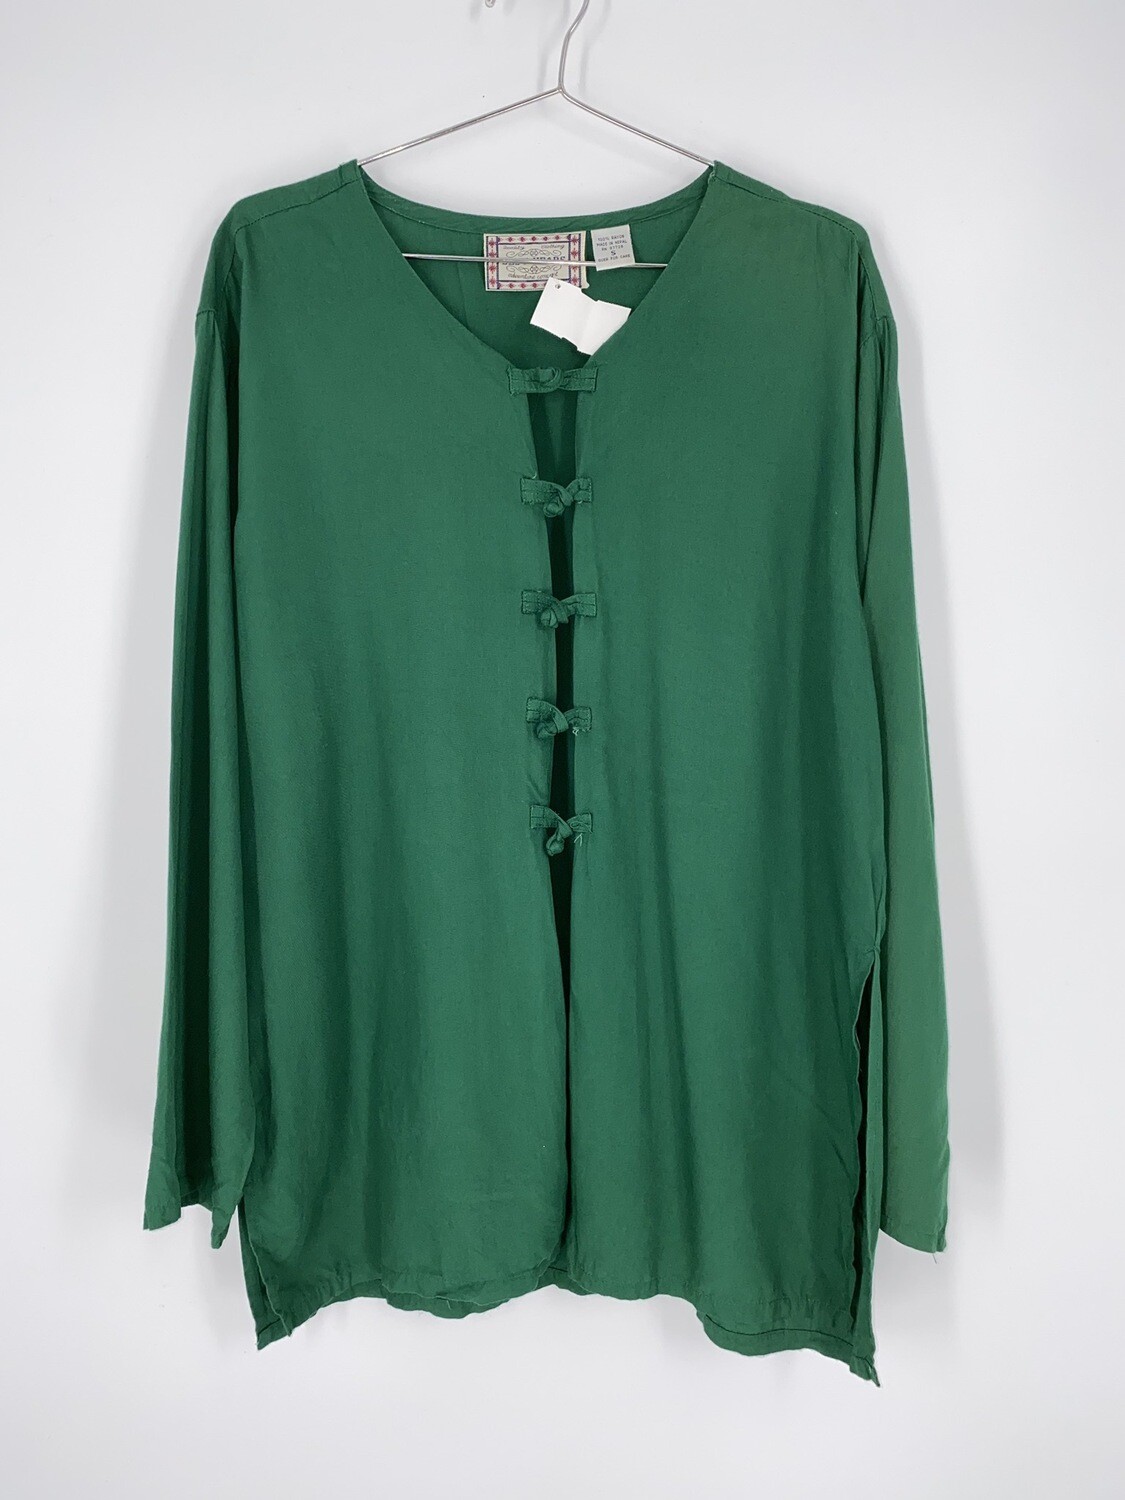 Green Knot And Loop Closure Top Size S